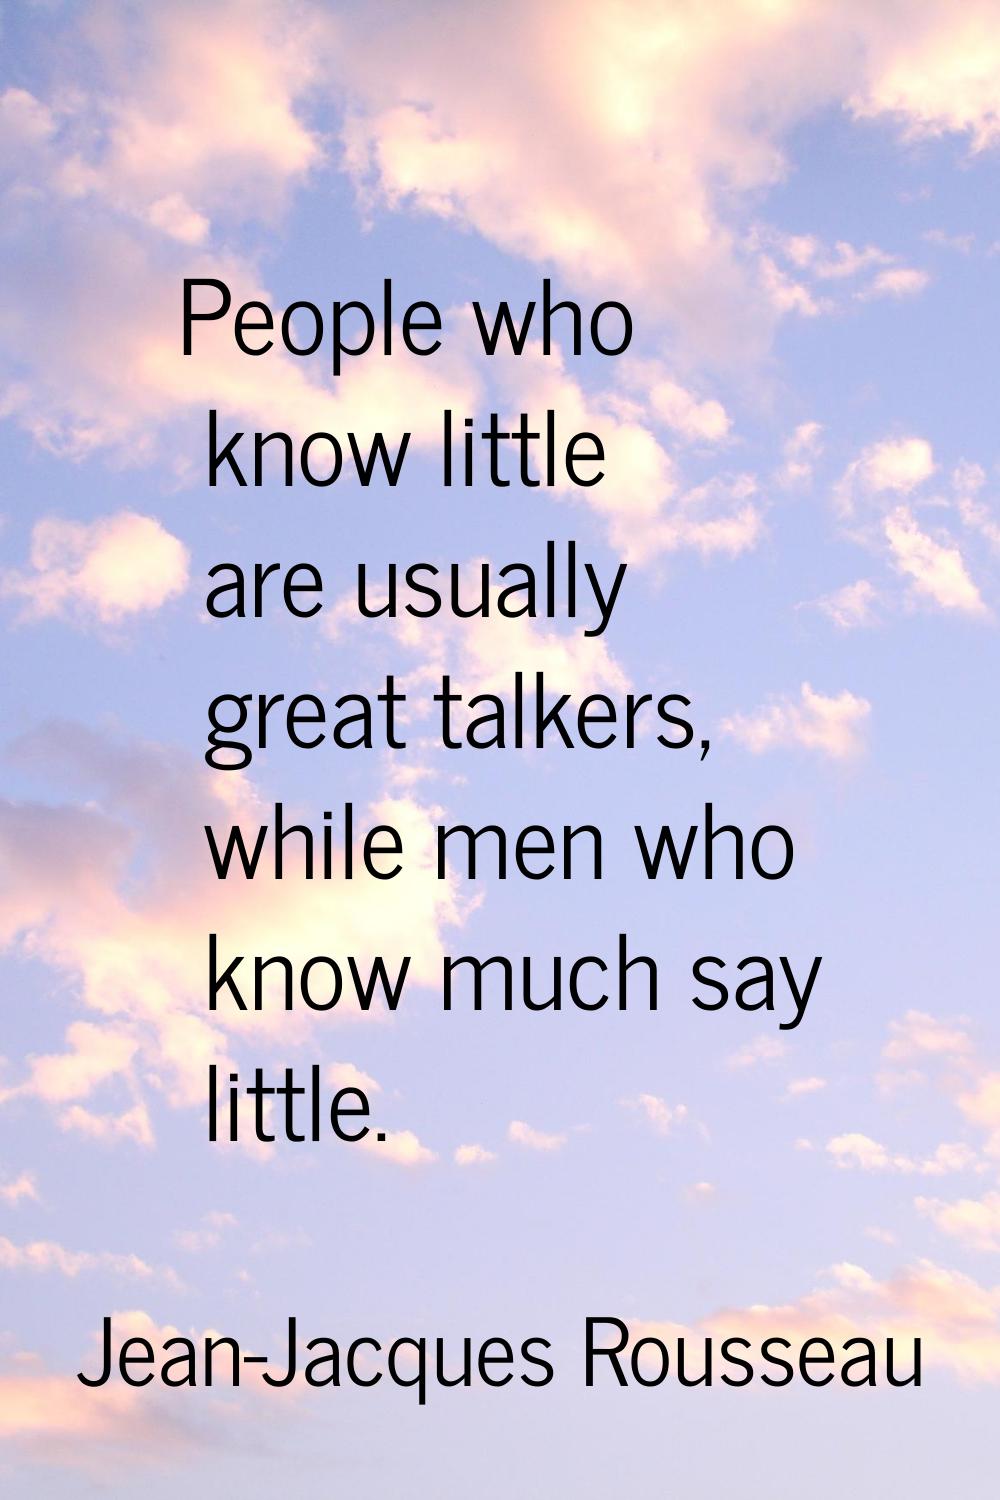 People who know little are usually great talkers, while men who know much say little.